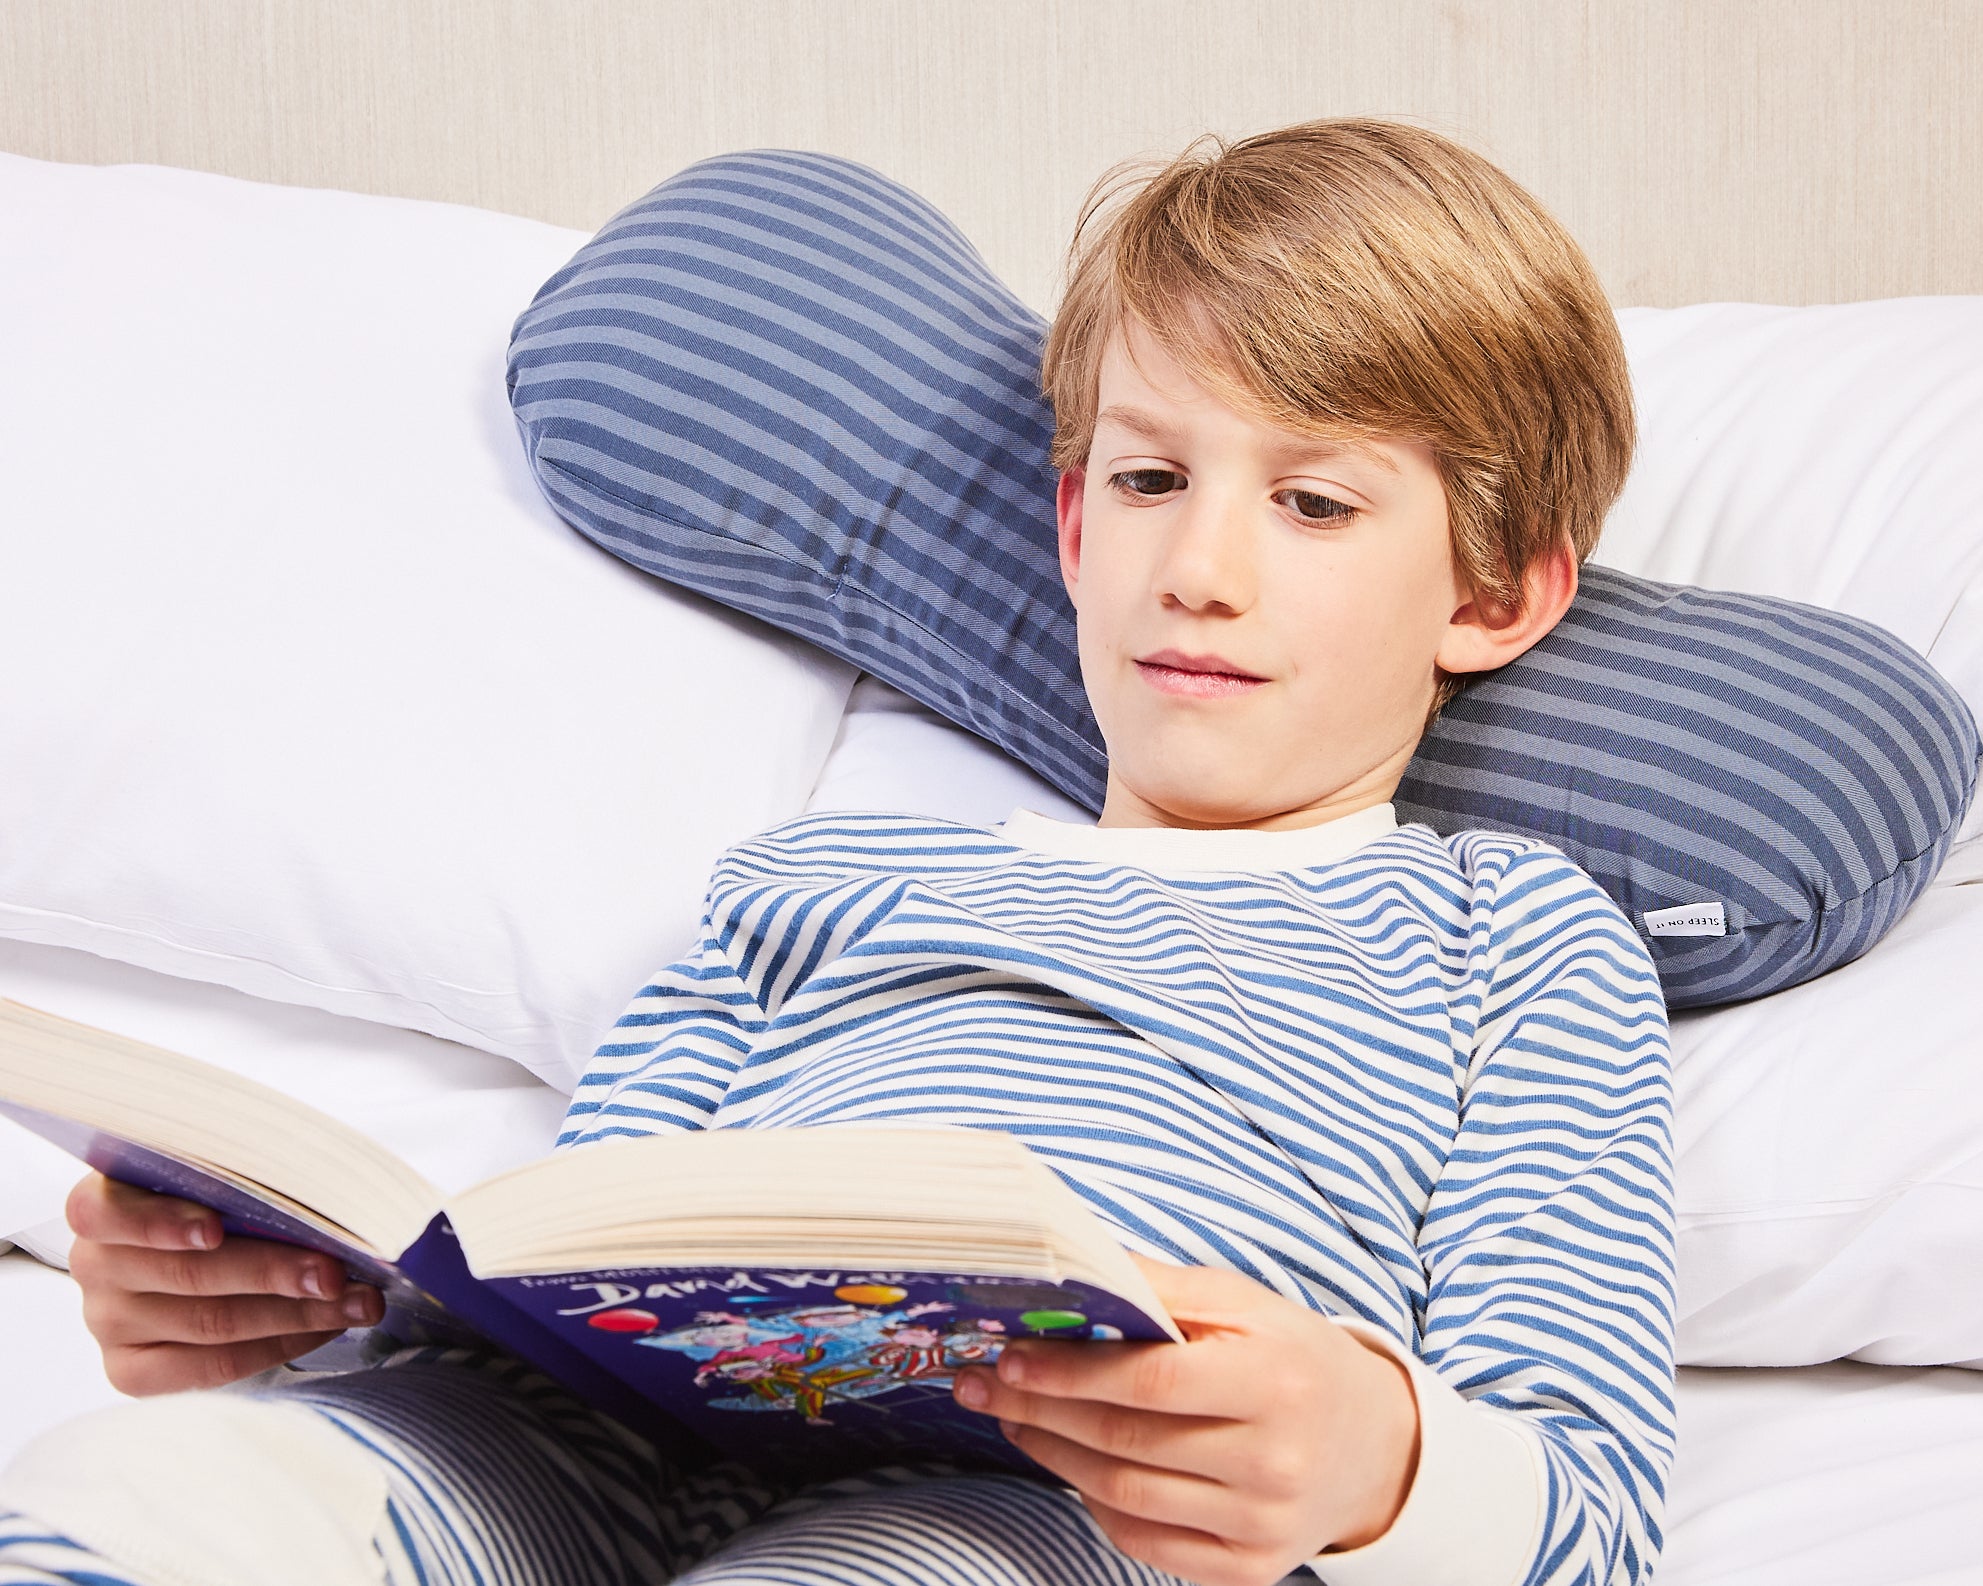 Young boy using a weighted short pillow for easier reading